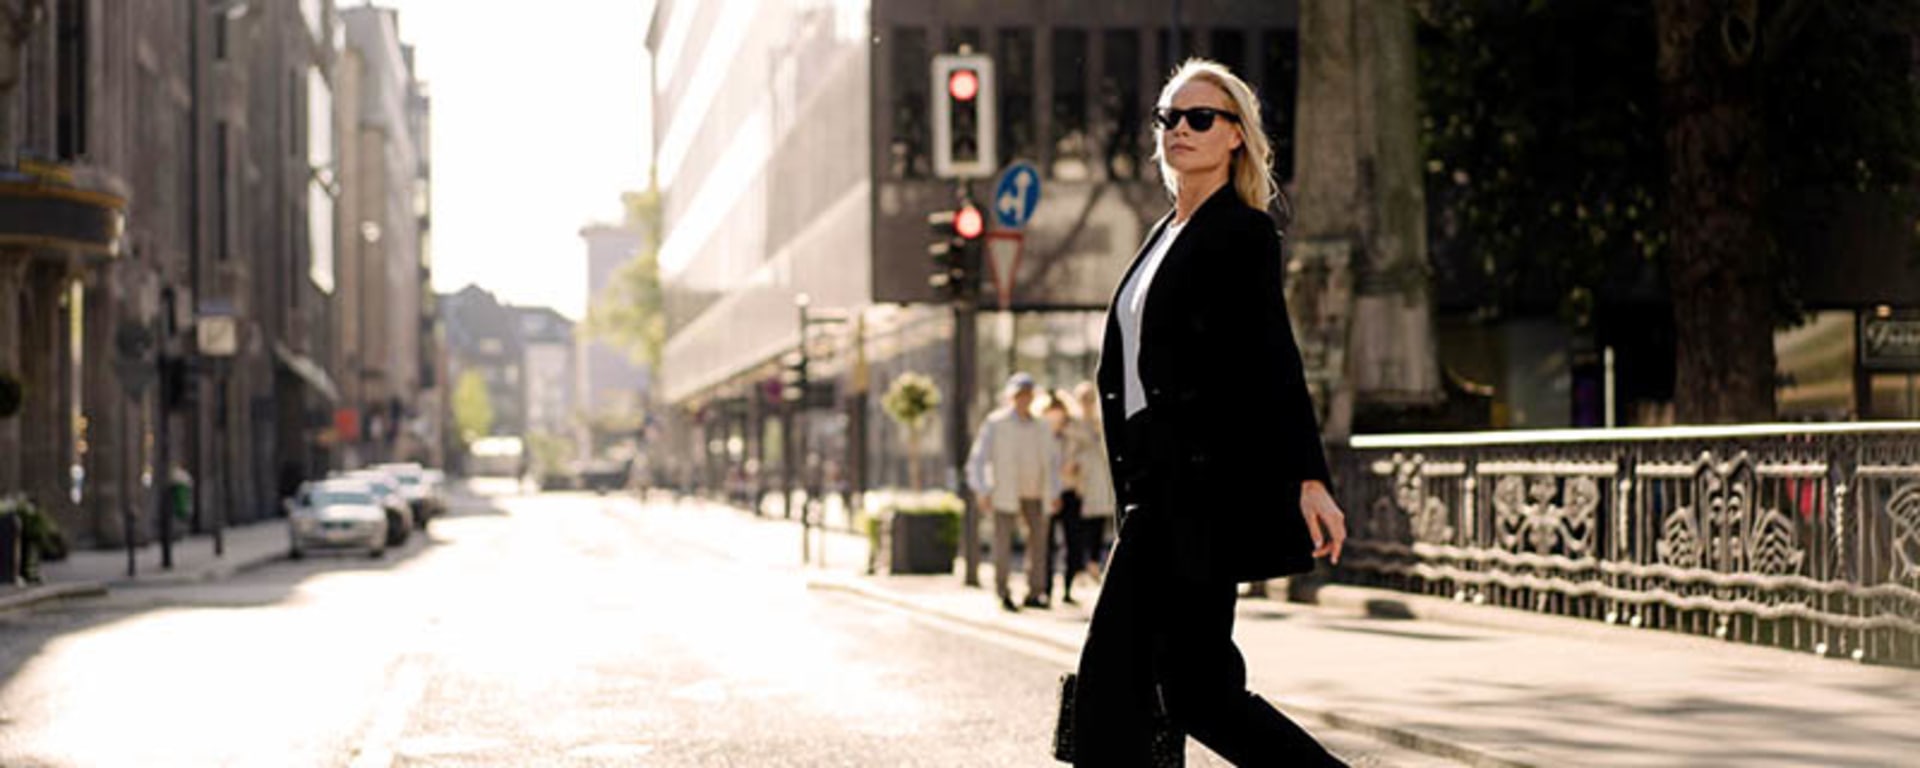 A woman in a black suit and sunglasses confidently crossing a street.